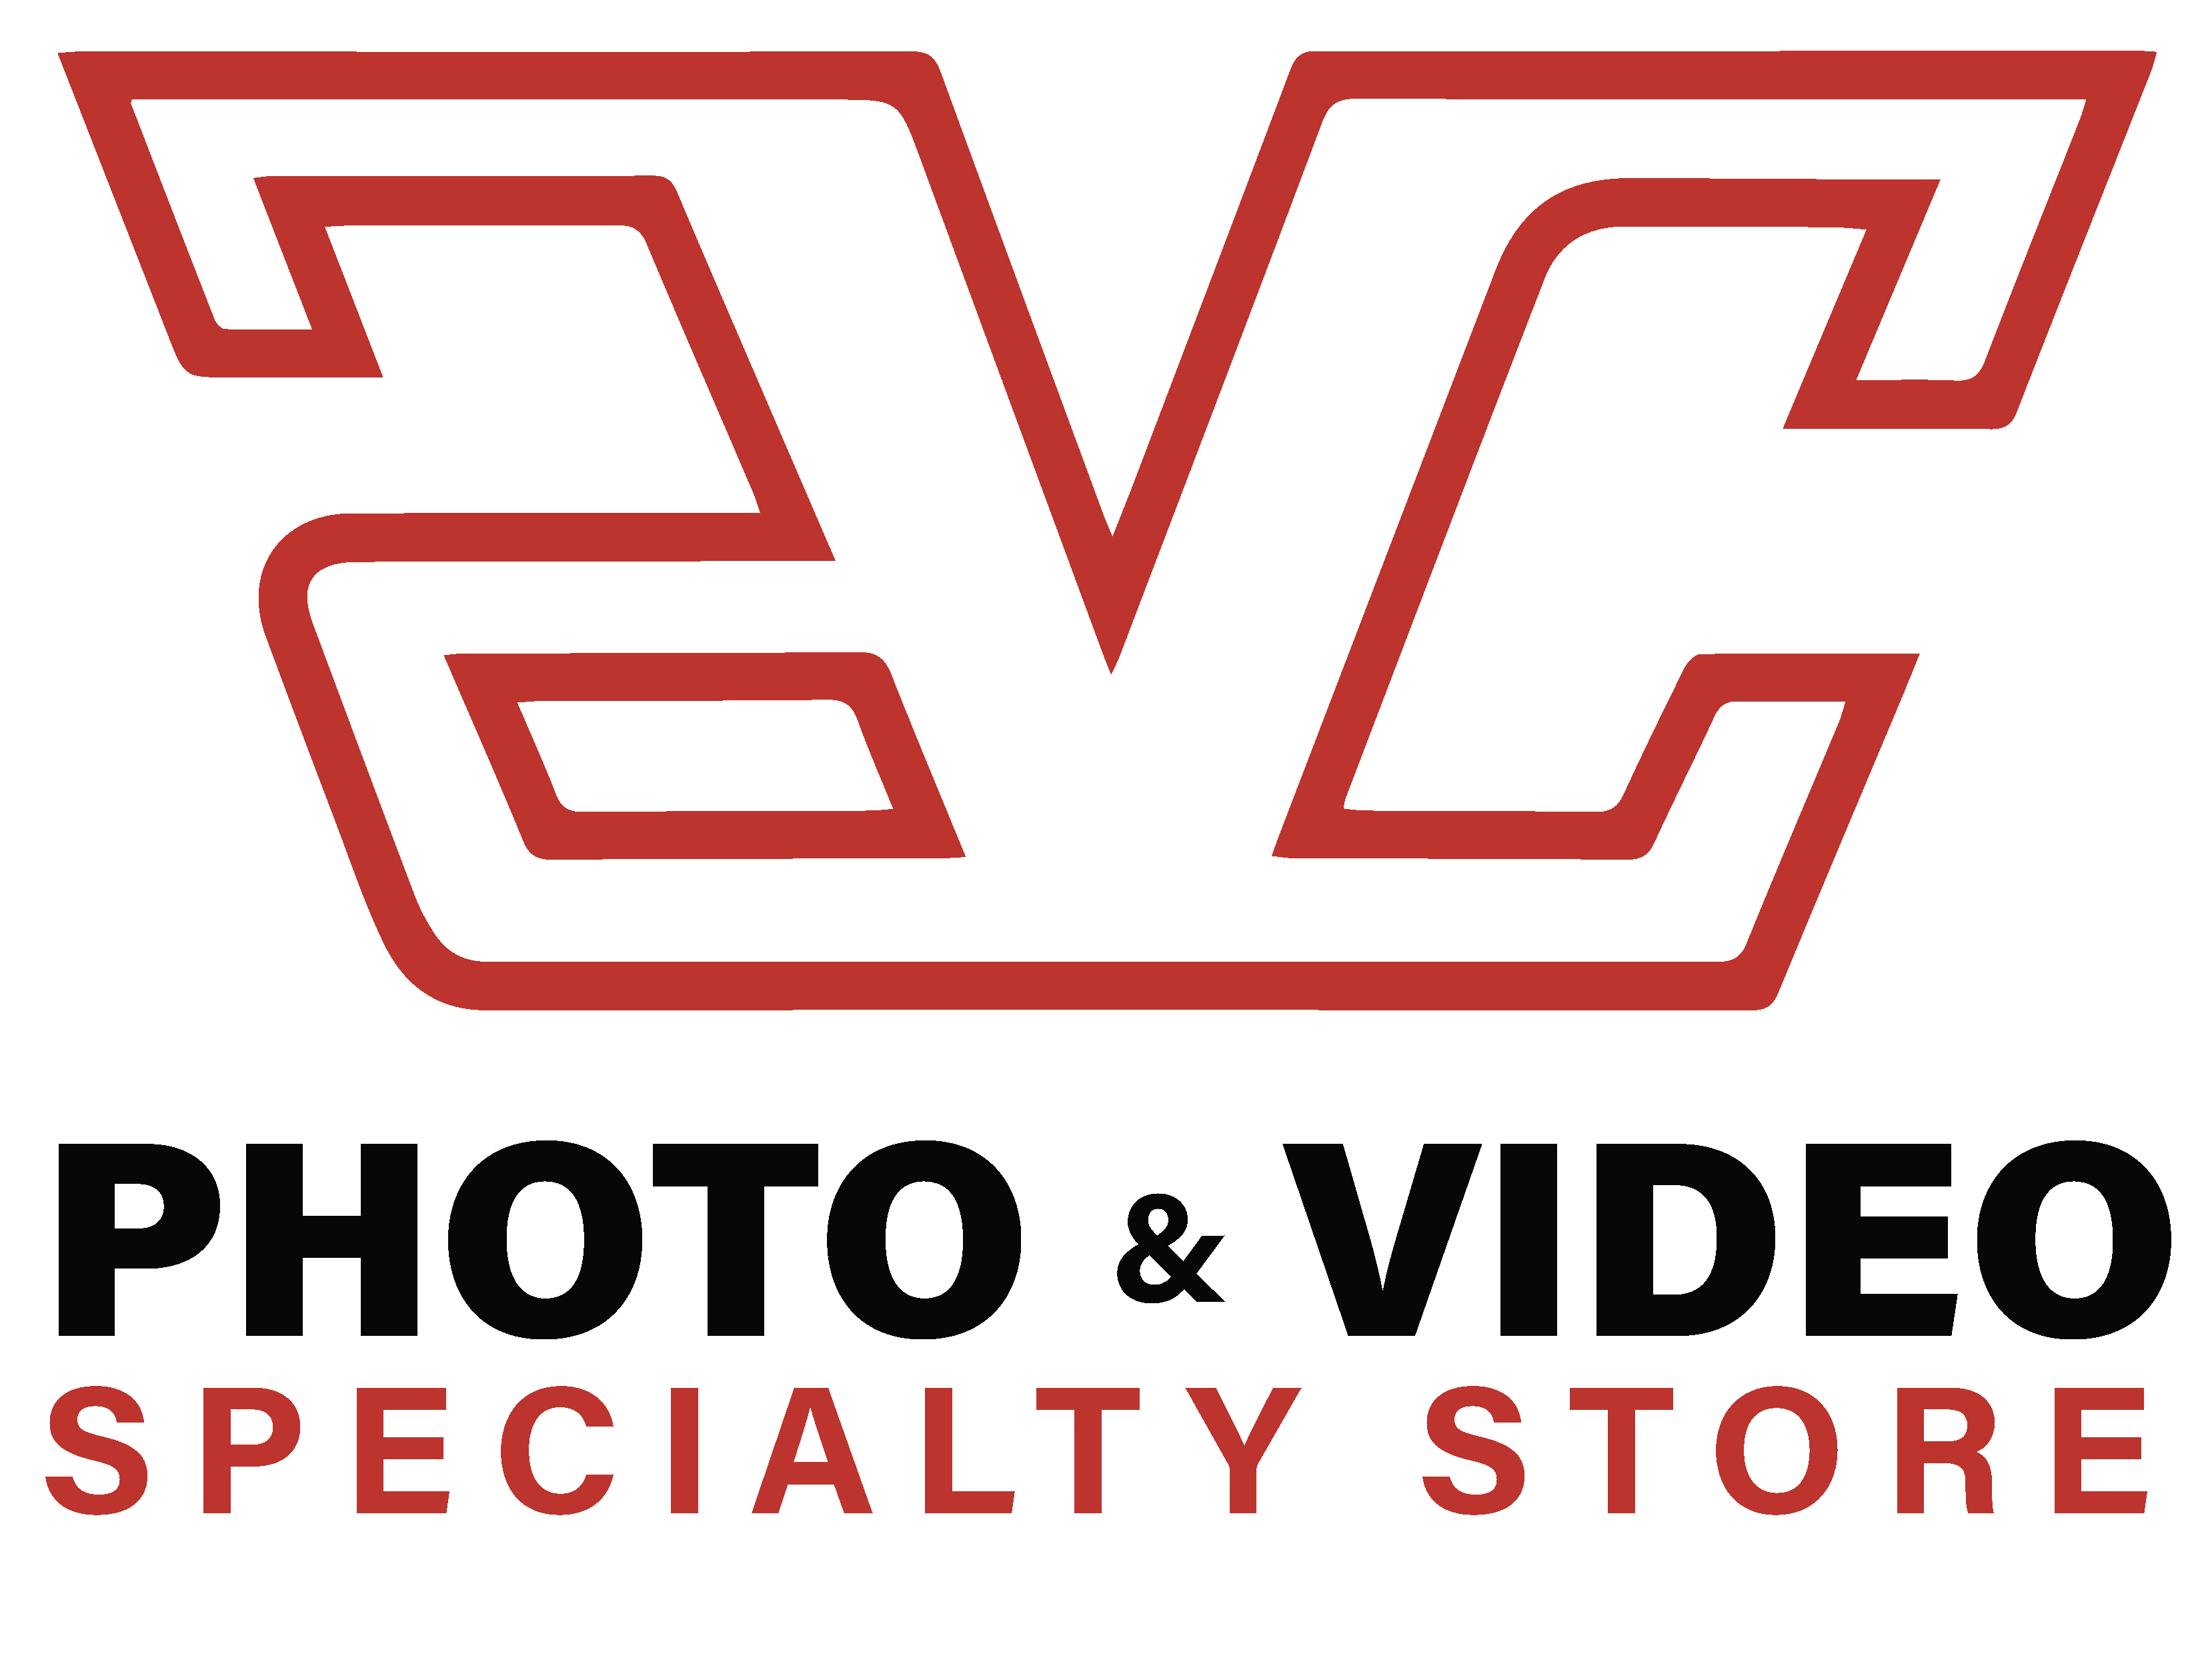 AVC Photo & Video Specialty Store